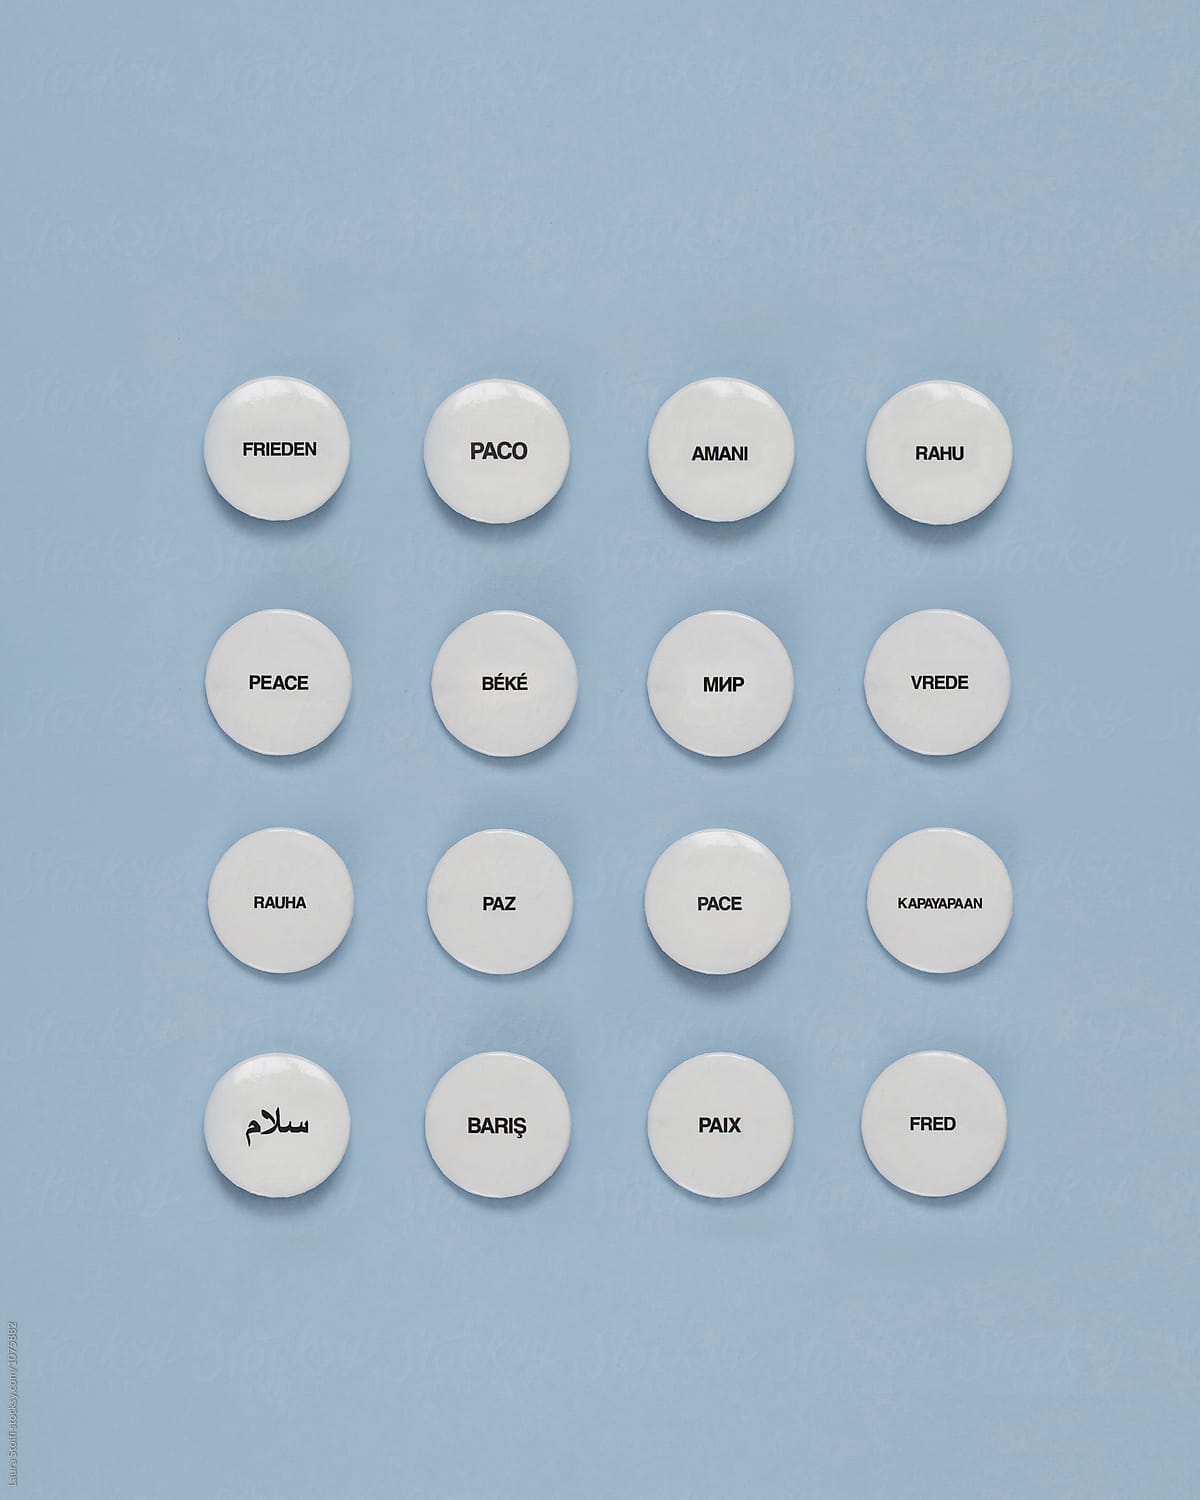 16 pins spelling the word PEACE in different languages